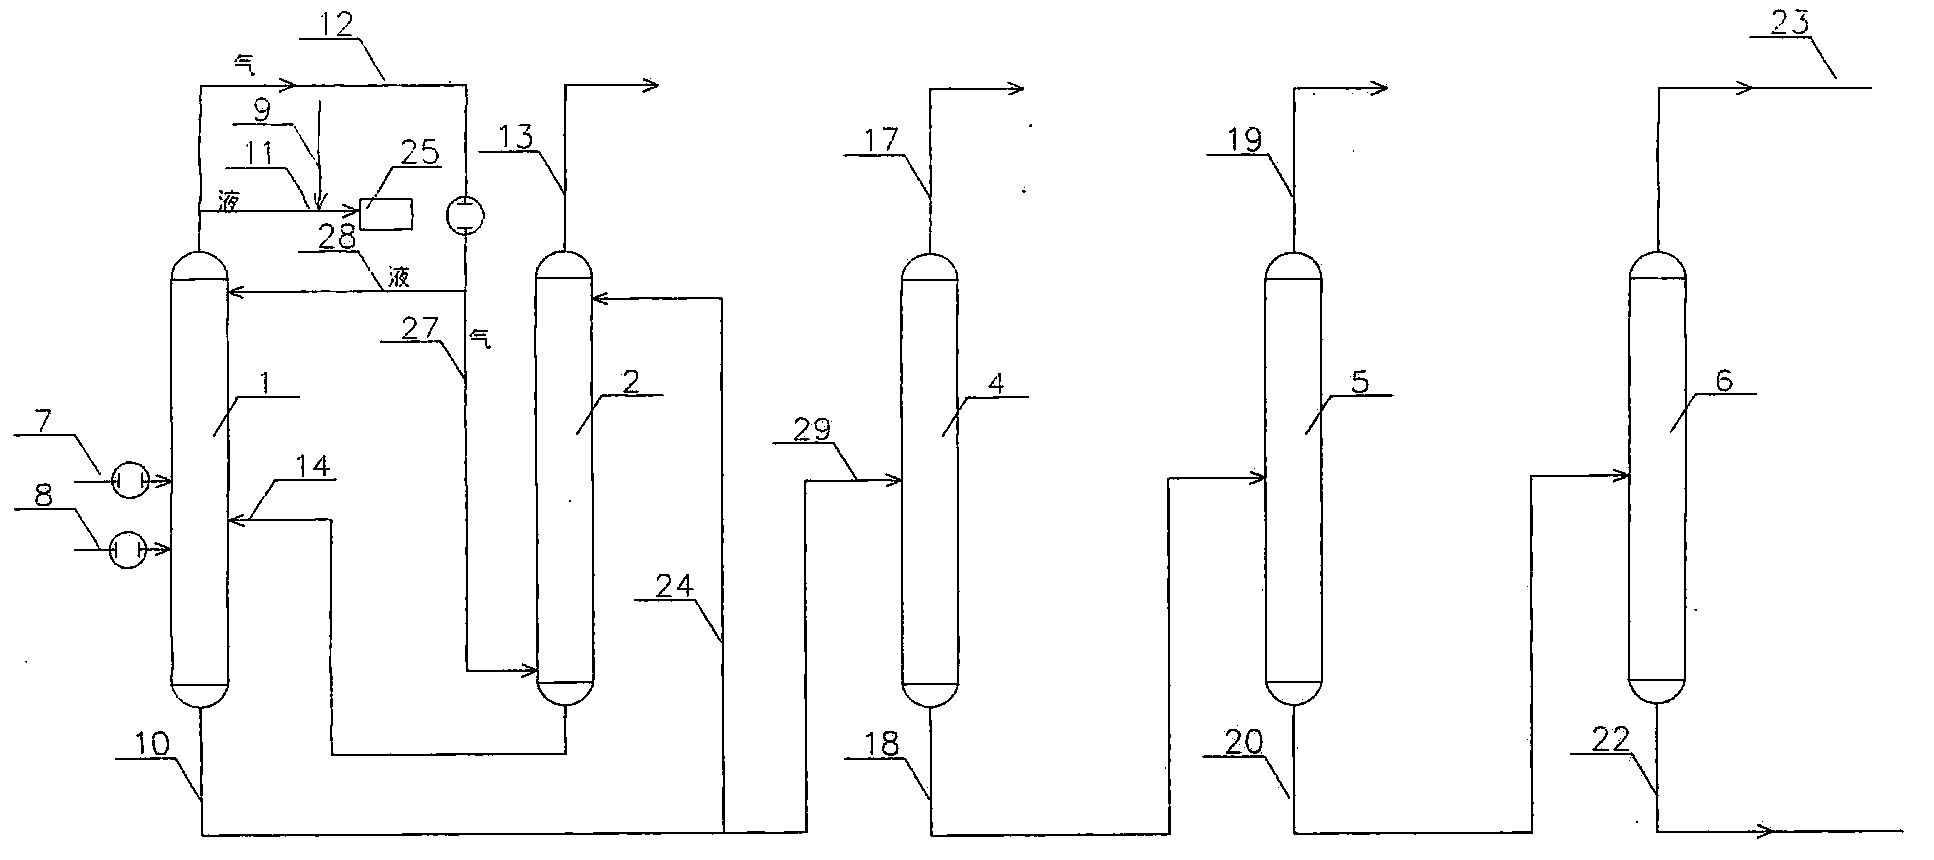 Product separation process for preparing ethylbenzene and/or propylbenzene from gas containing ethylene and/or propylene